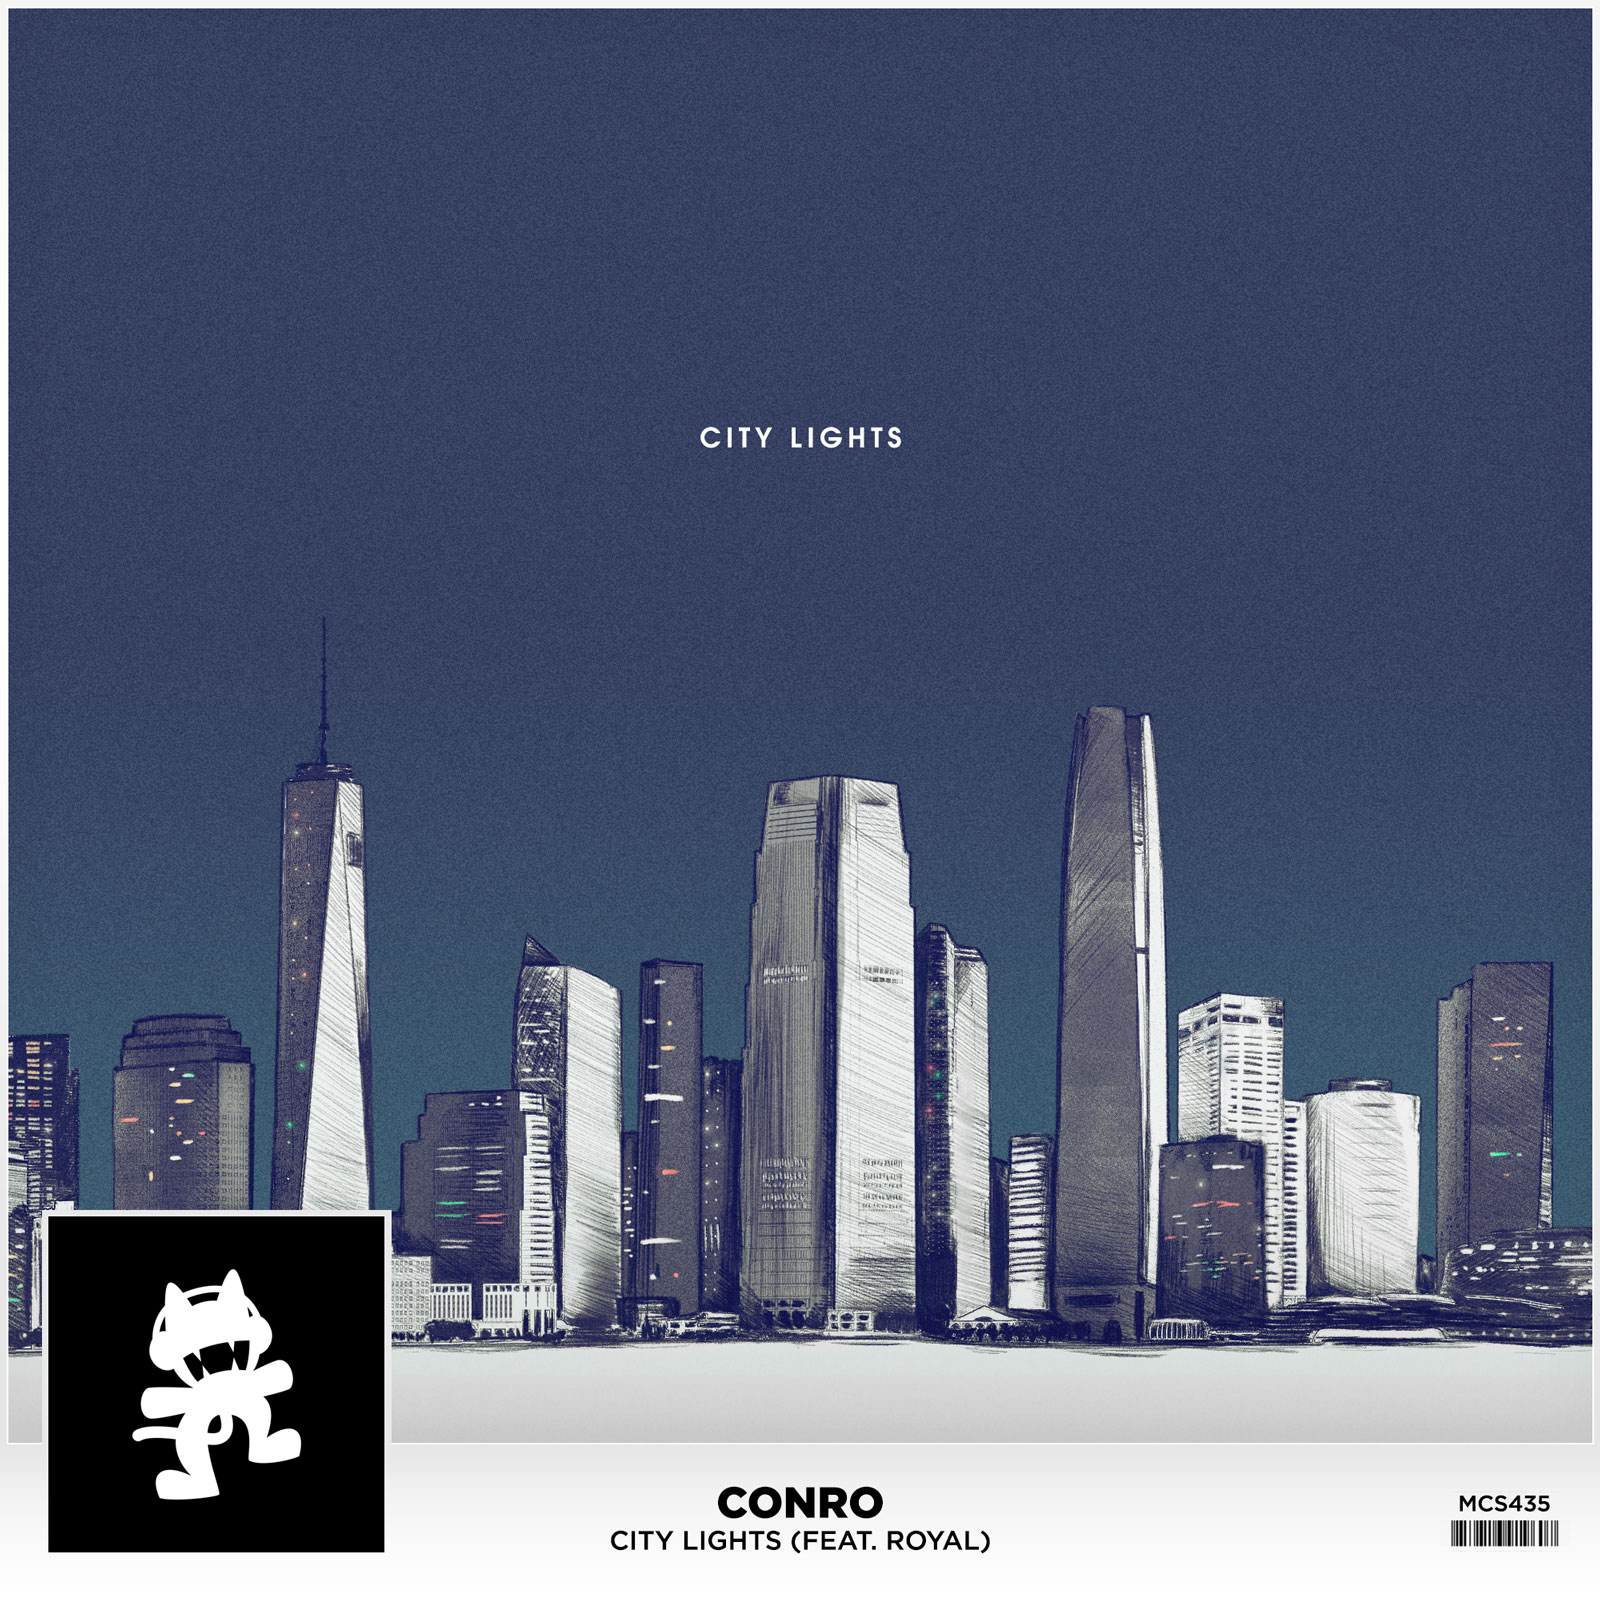 Conro Continues to Bring Fans New Sounds with “City Lights”